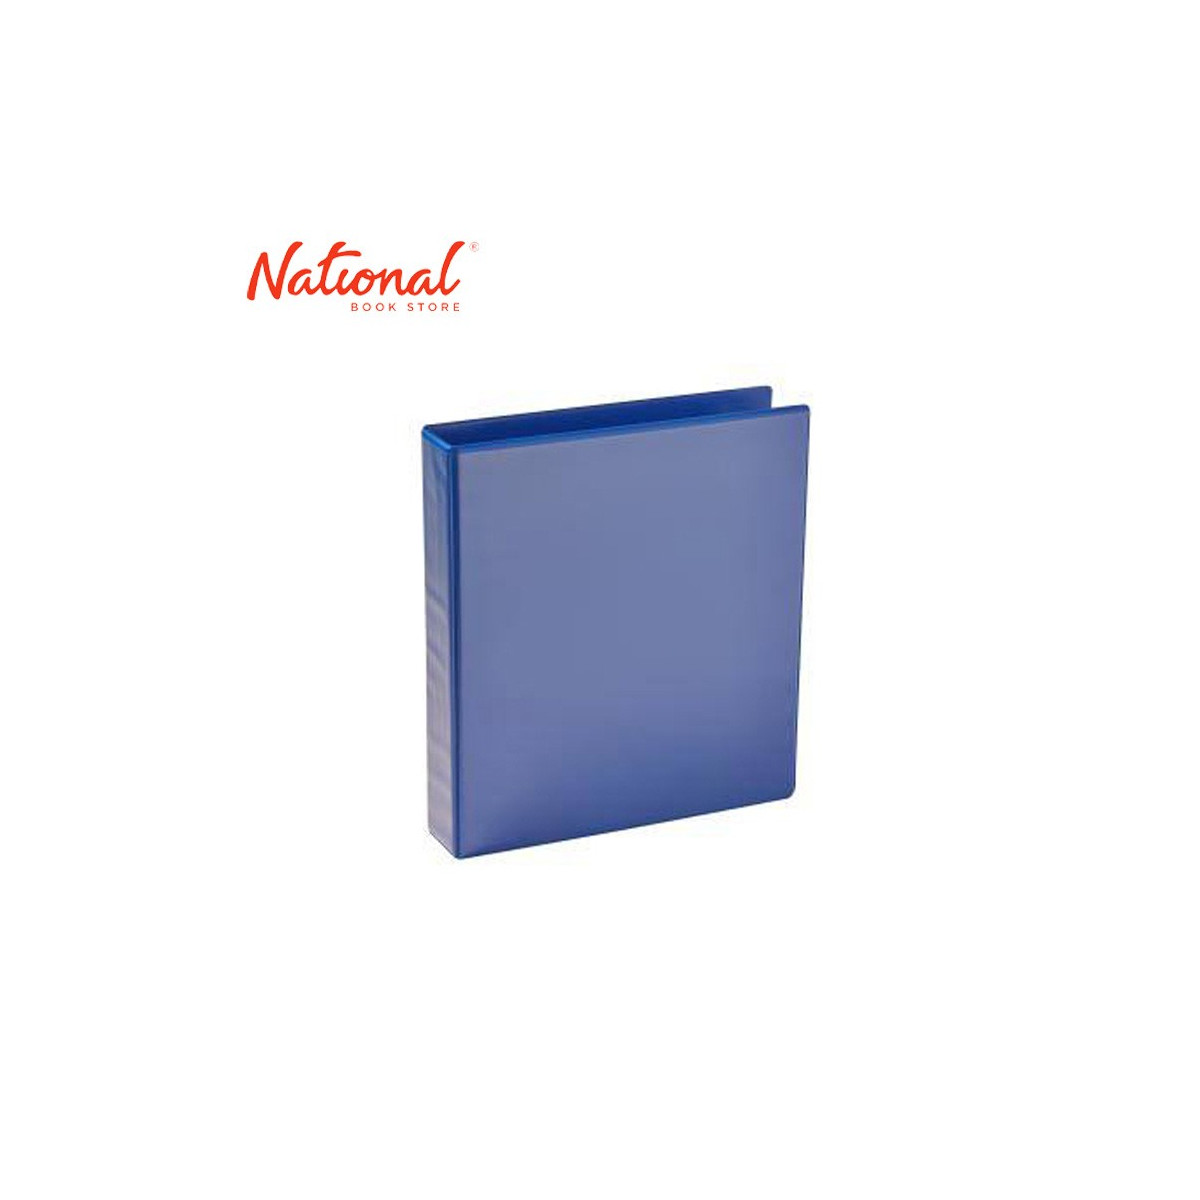 SEAGULL RING BINDER 3R CVP25 A4 2.5IN DTYPE PVC COVER W FRONT & BACK OUTER POCKETS, BLUE